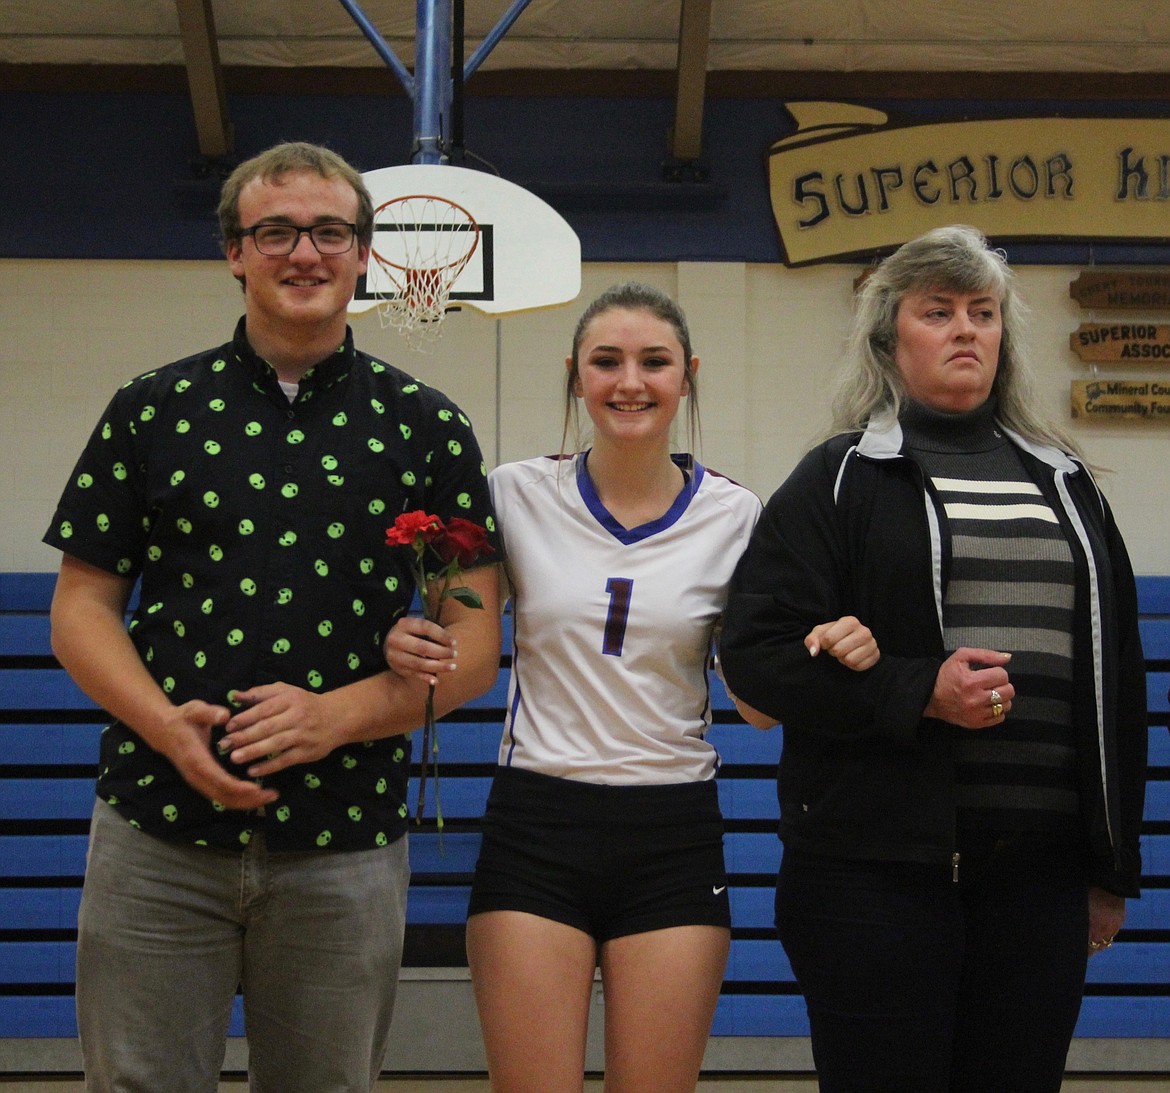 Alberton senior Kristina Solinger was escorted by her brother, Jordan, and mother, Melinda Taapken during Senior Night in Superior on Oct. 20. (Photo courtesy of Frankie Kelly)